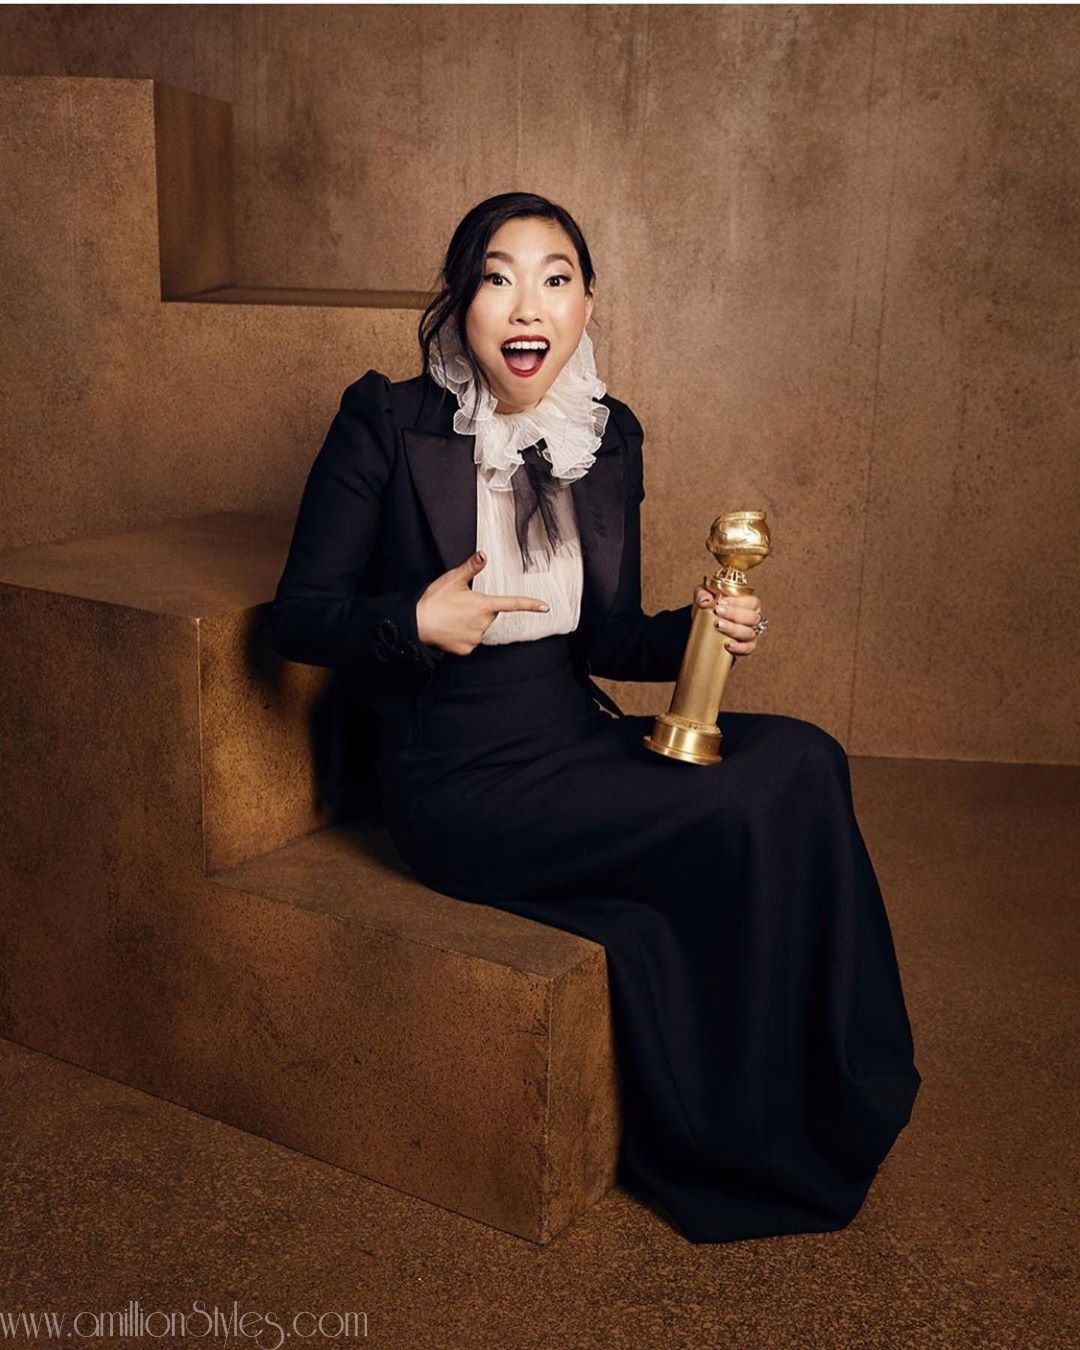 Quick Look At Some Winners At The 2020 Golden Globes